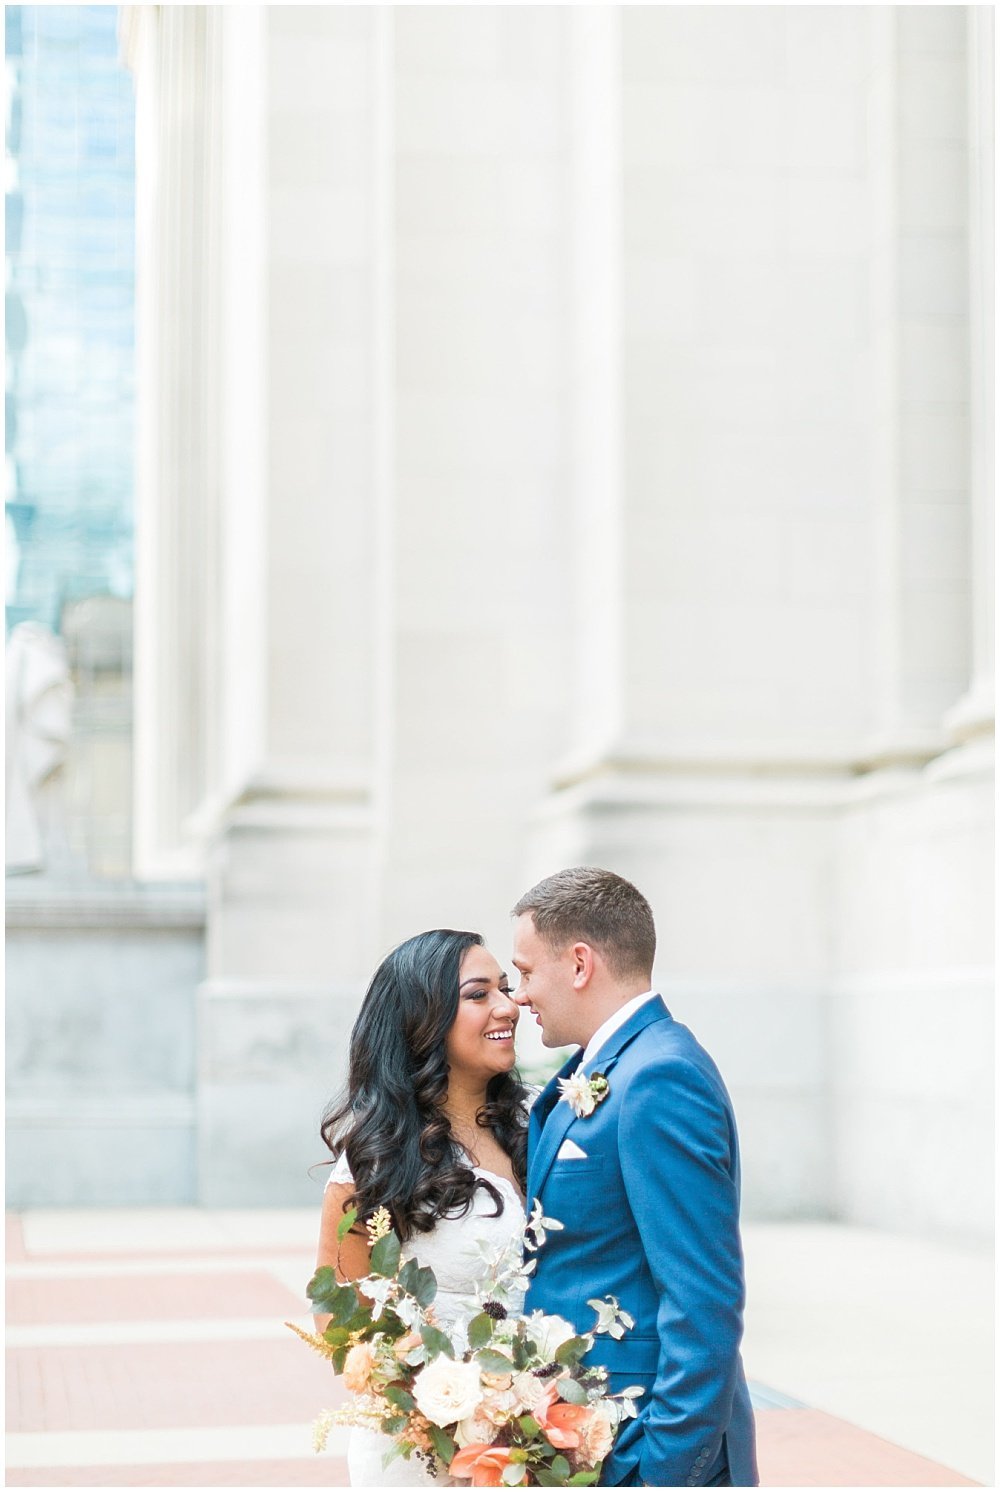 Summer-Mexican-Inspired-Gold-And-Floral-Crowne-Plaza-Indianapolis-Downtown-Union-Station-Wedding-Cory-Jackie-Wedding-Photographers-Jessica-Dum-Wedding-Coordination_photo___0009